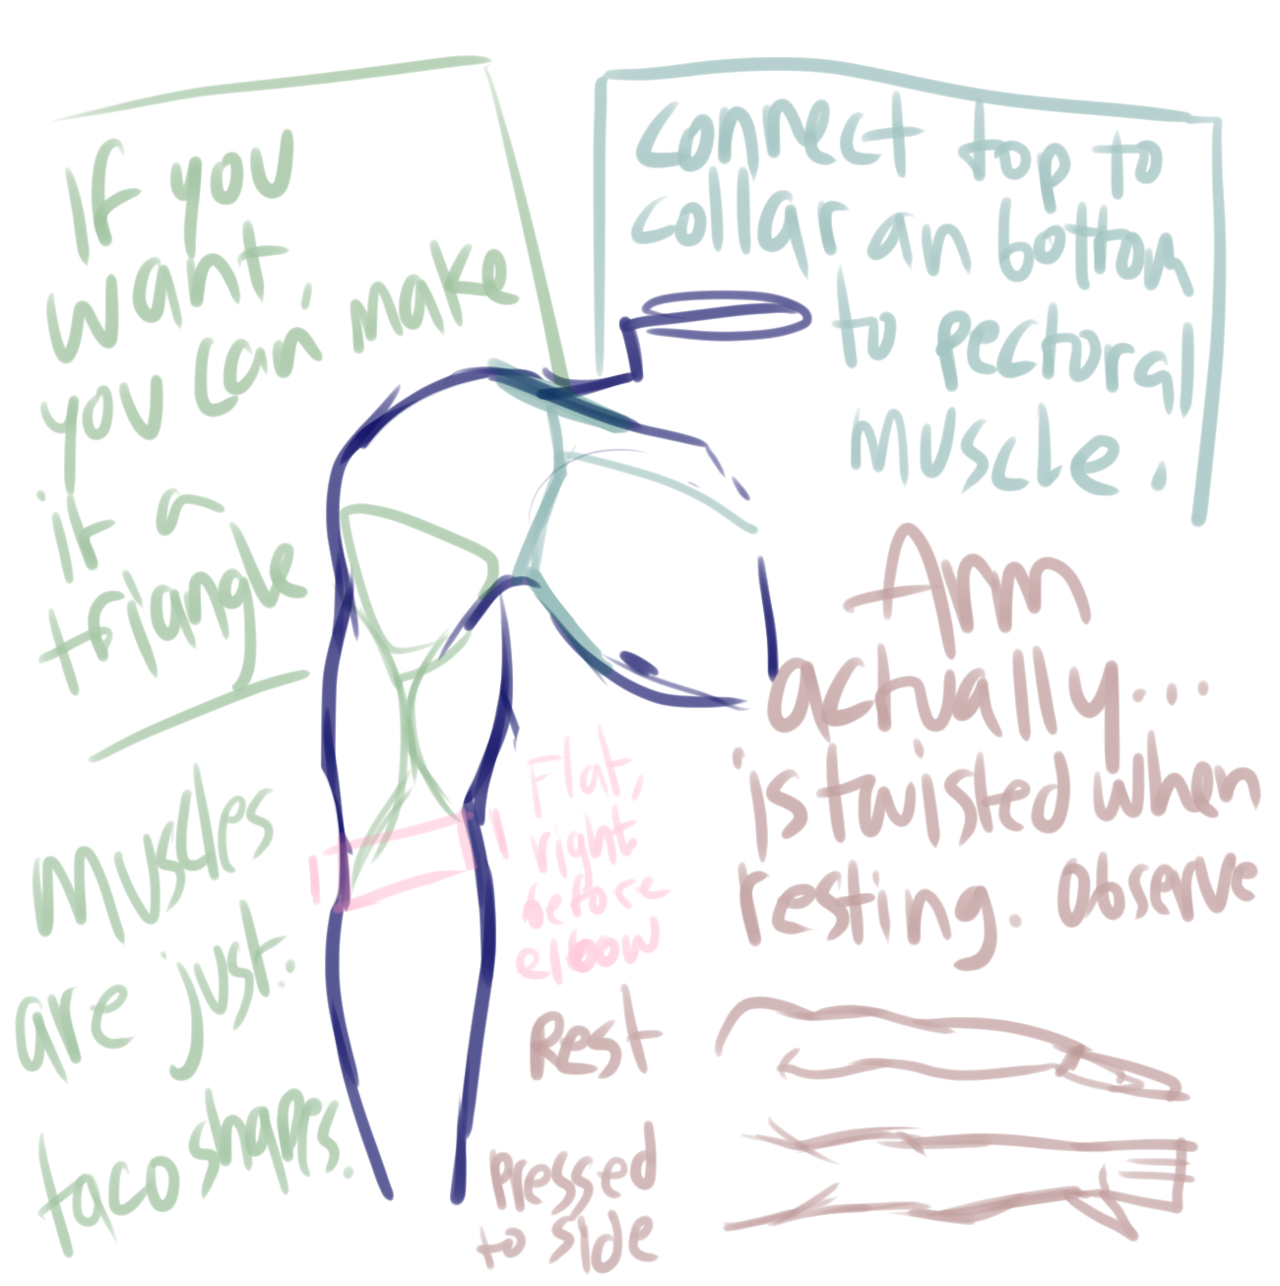 ask-art-student-prussia:its a difficut one and im usually lazy with drawing my arms